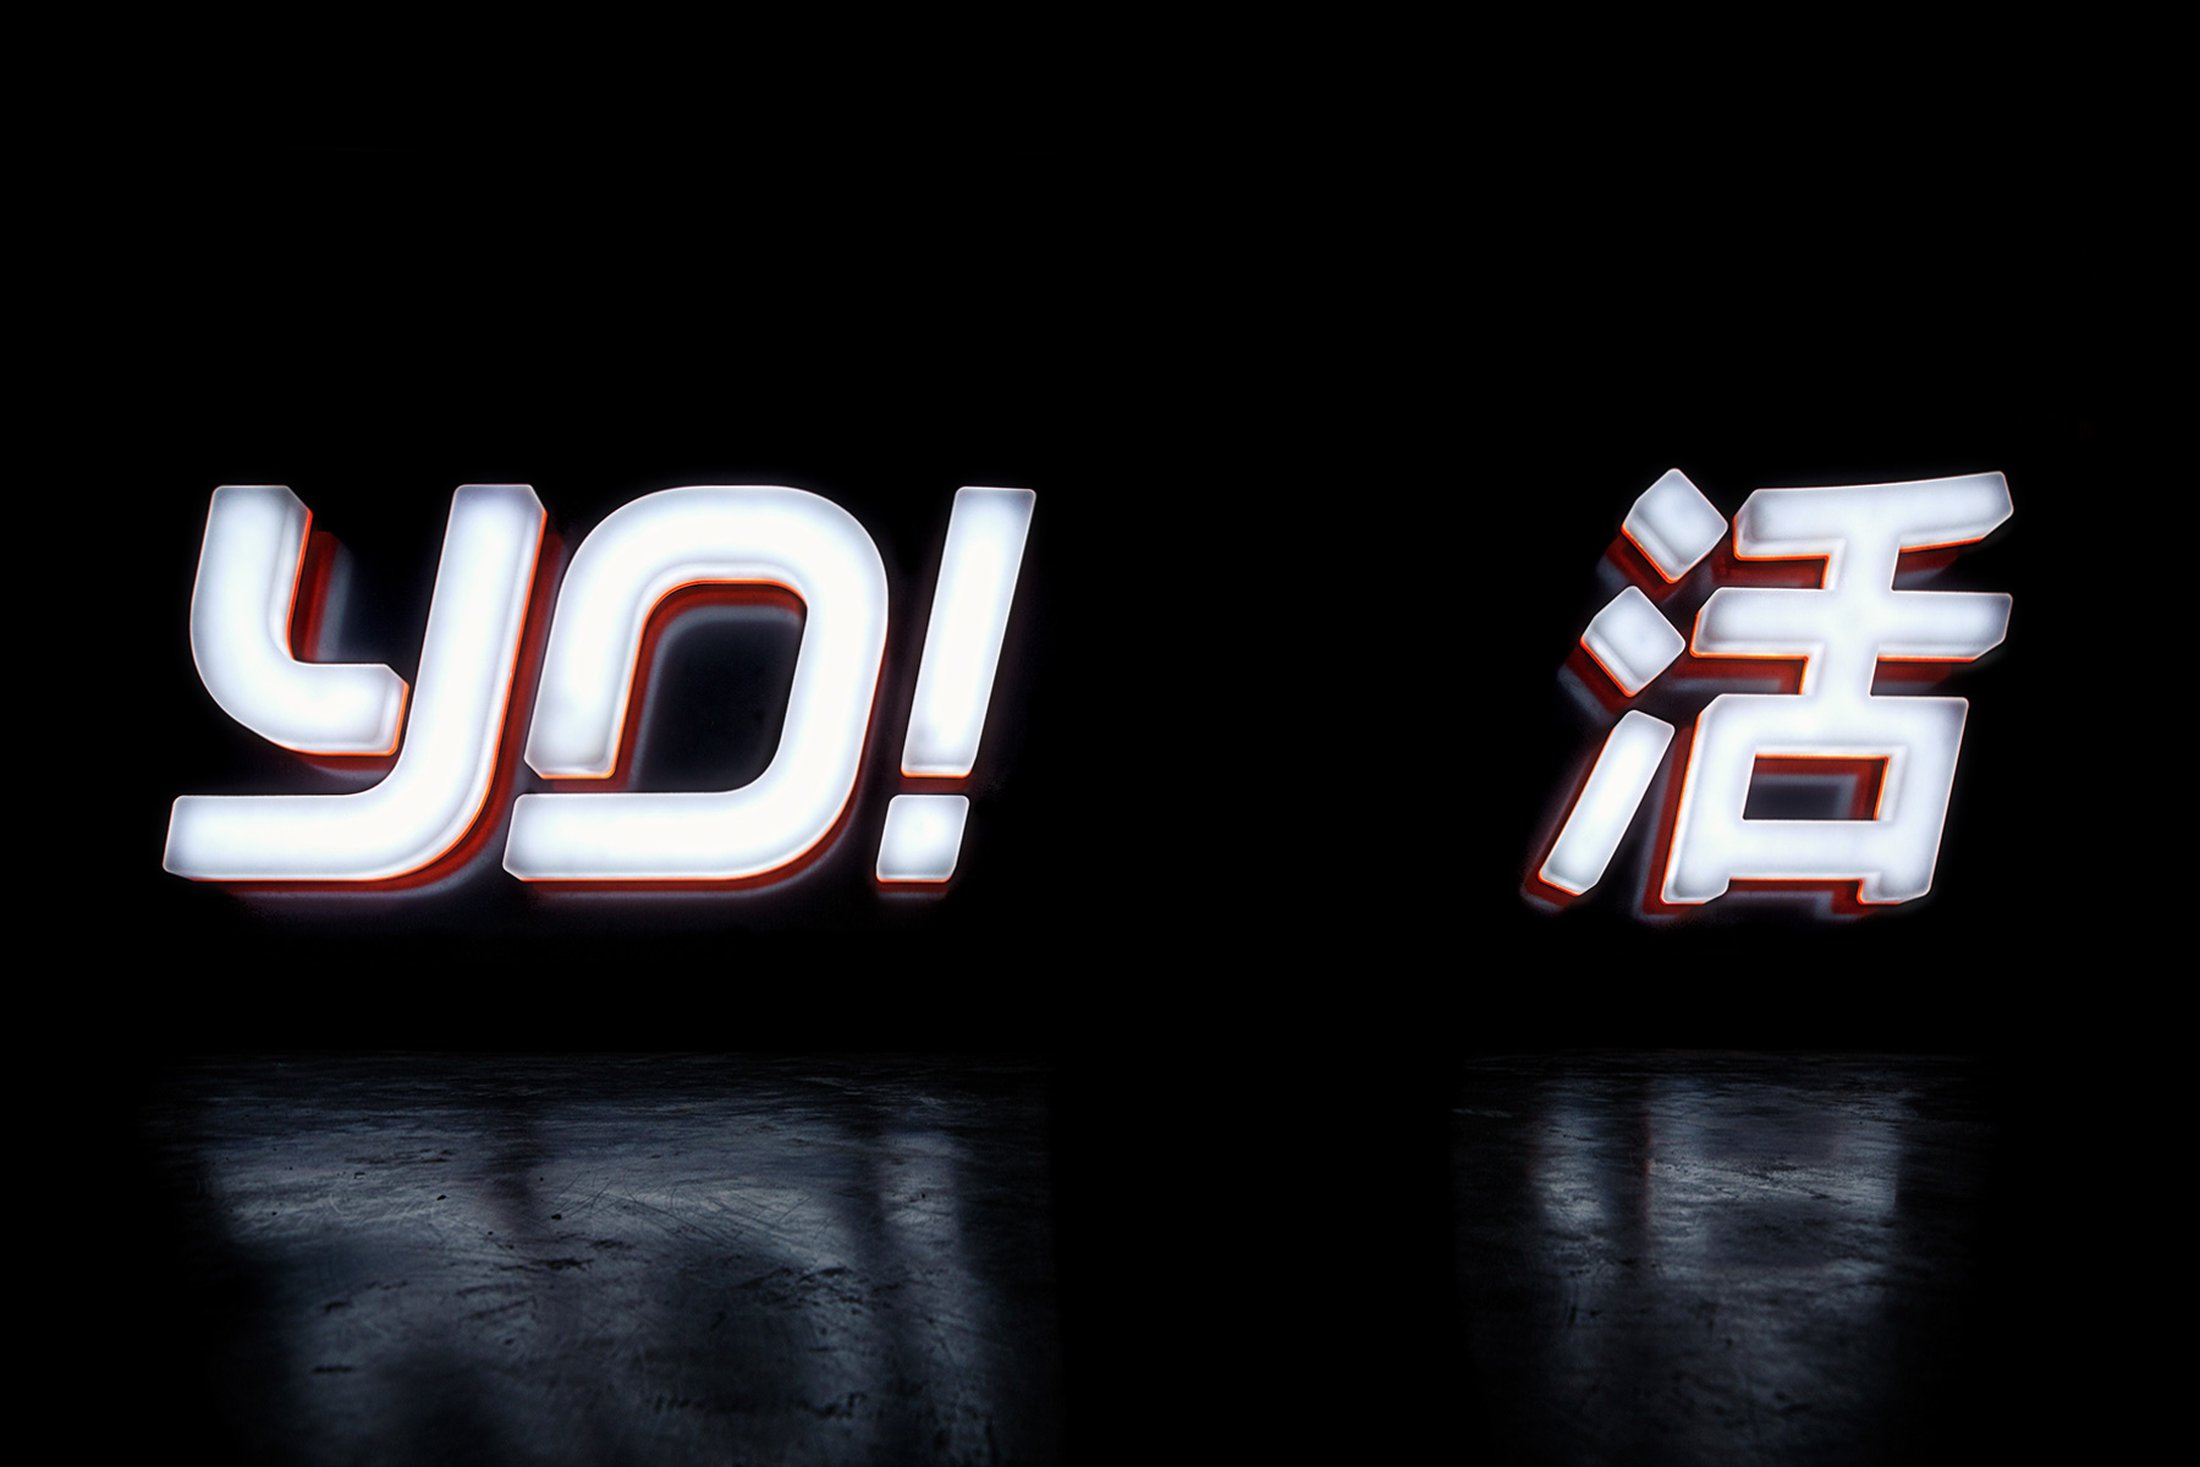 A rebrand for YO! Sushi, to coincide with global expansion for the restaurant chain.